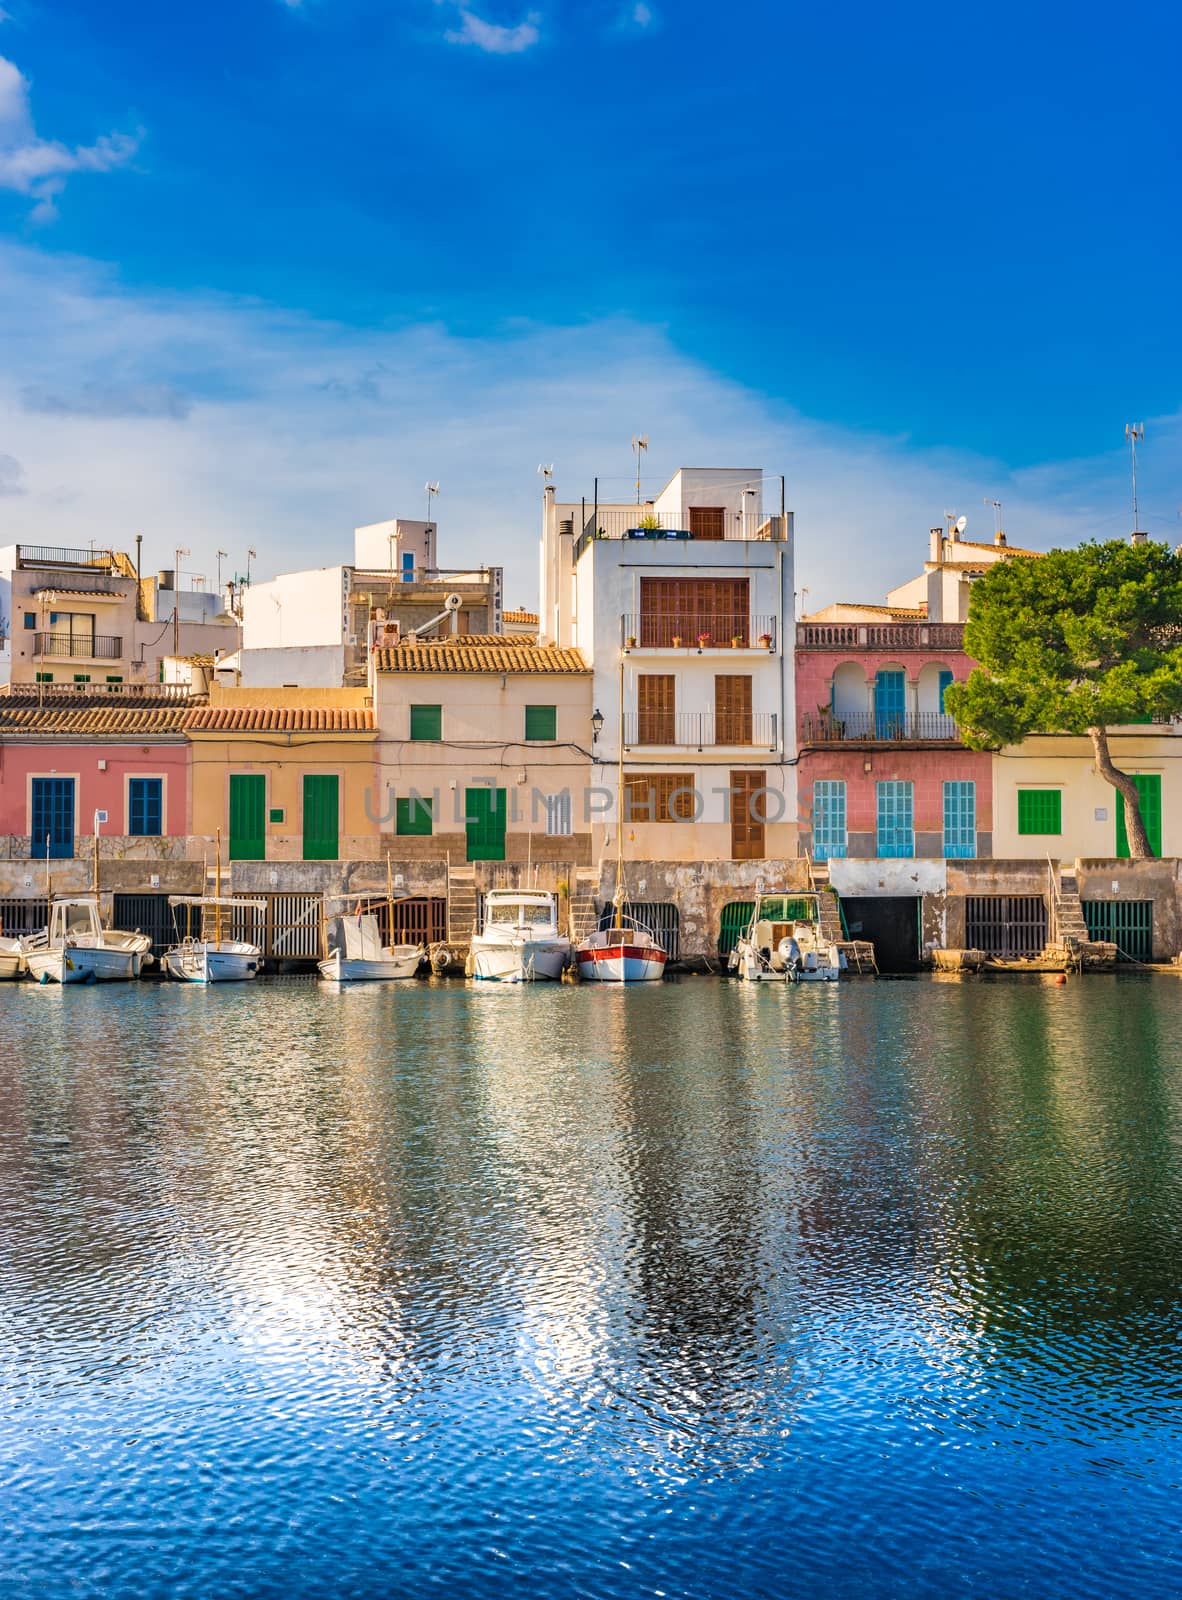 Colorful buildings at the harbor of Porto Colom, Majorca Spain by Vulcano